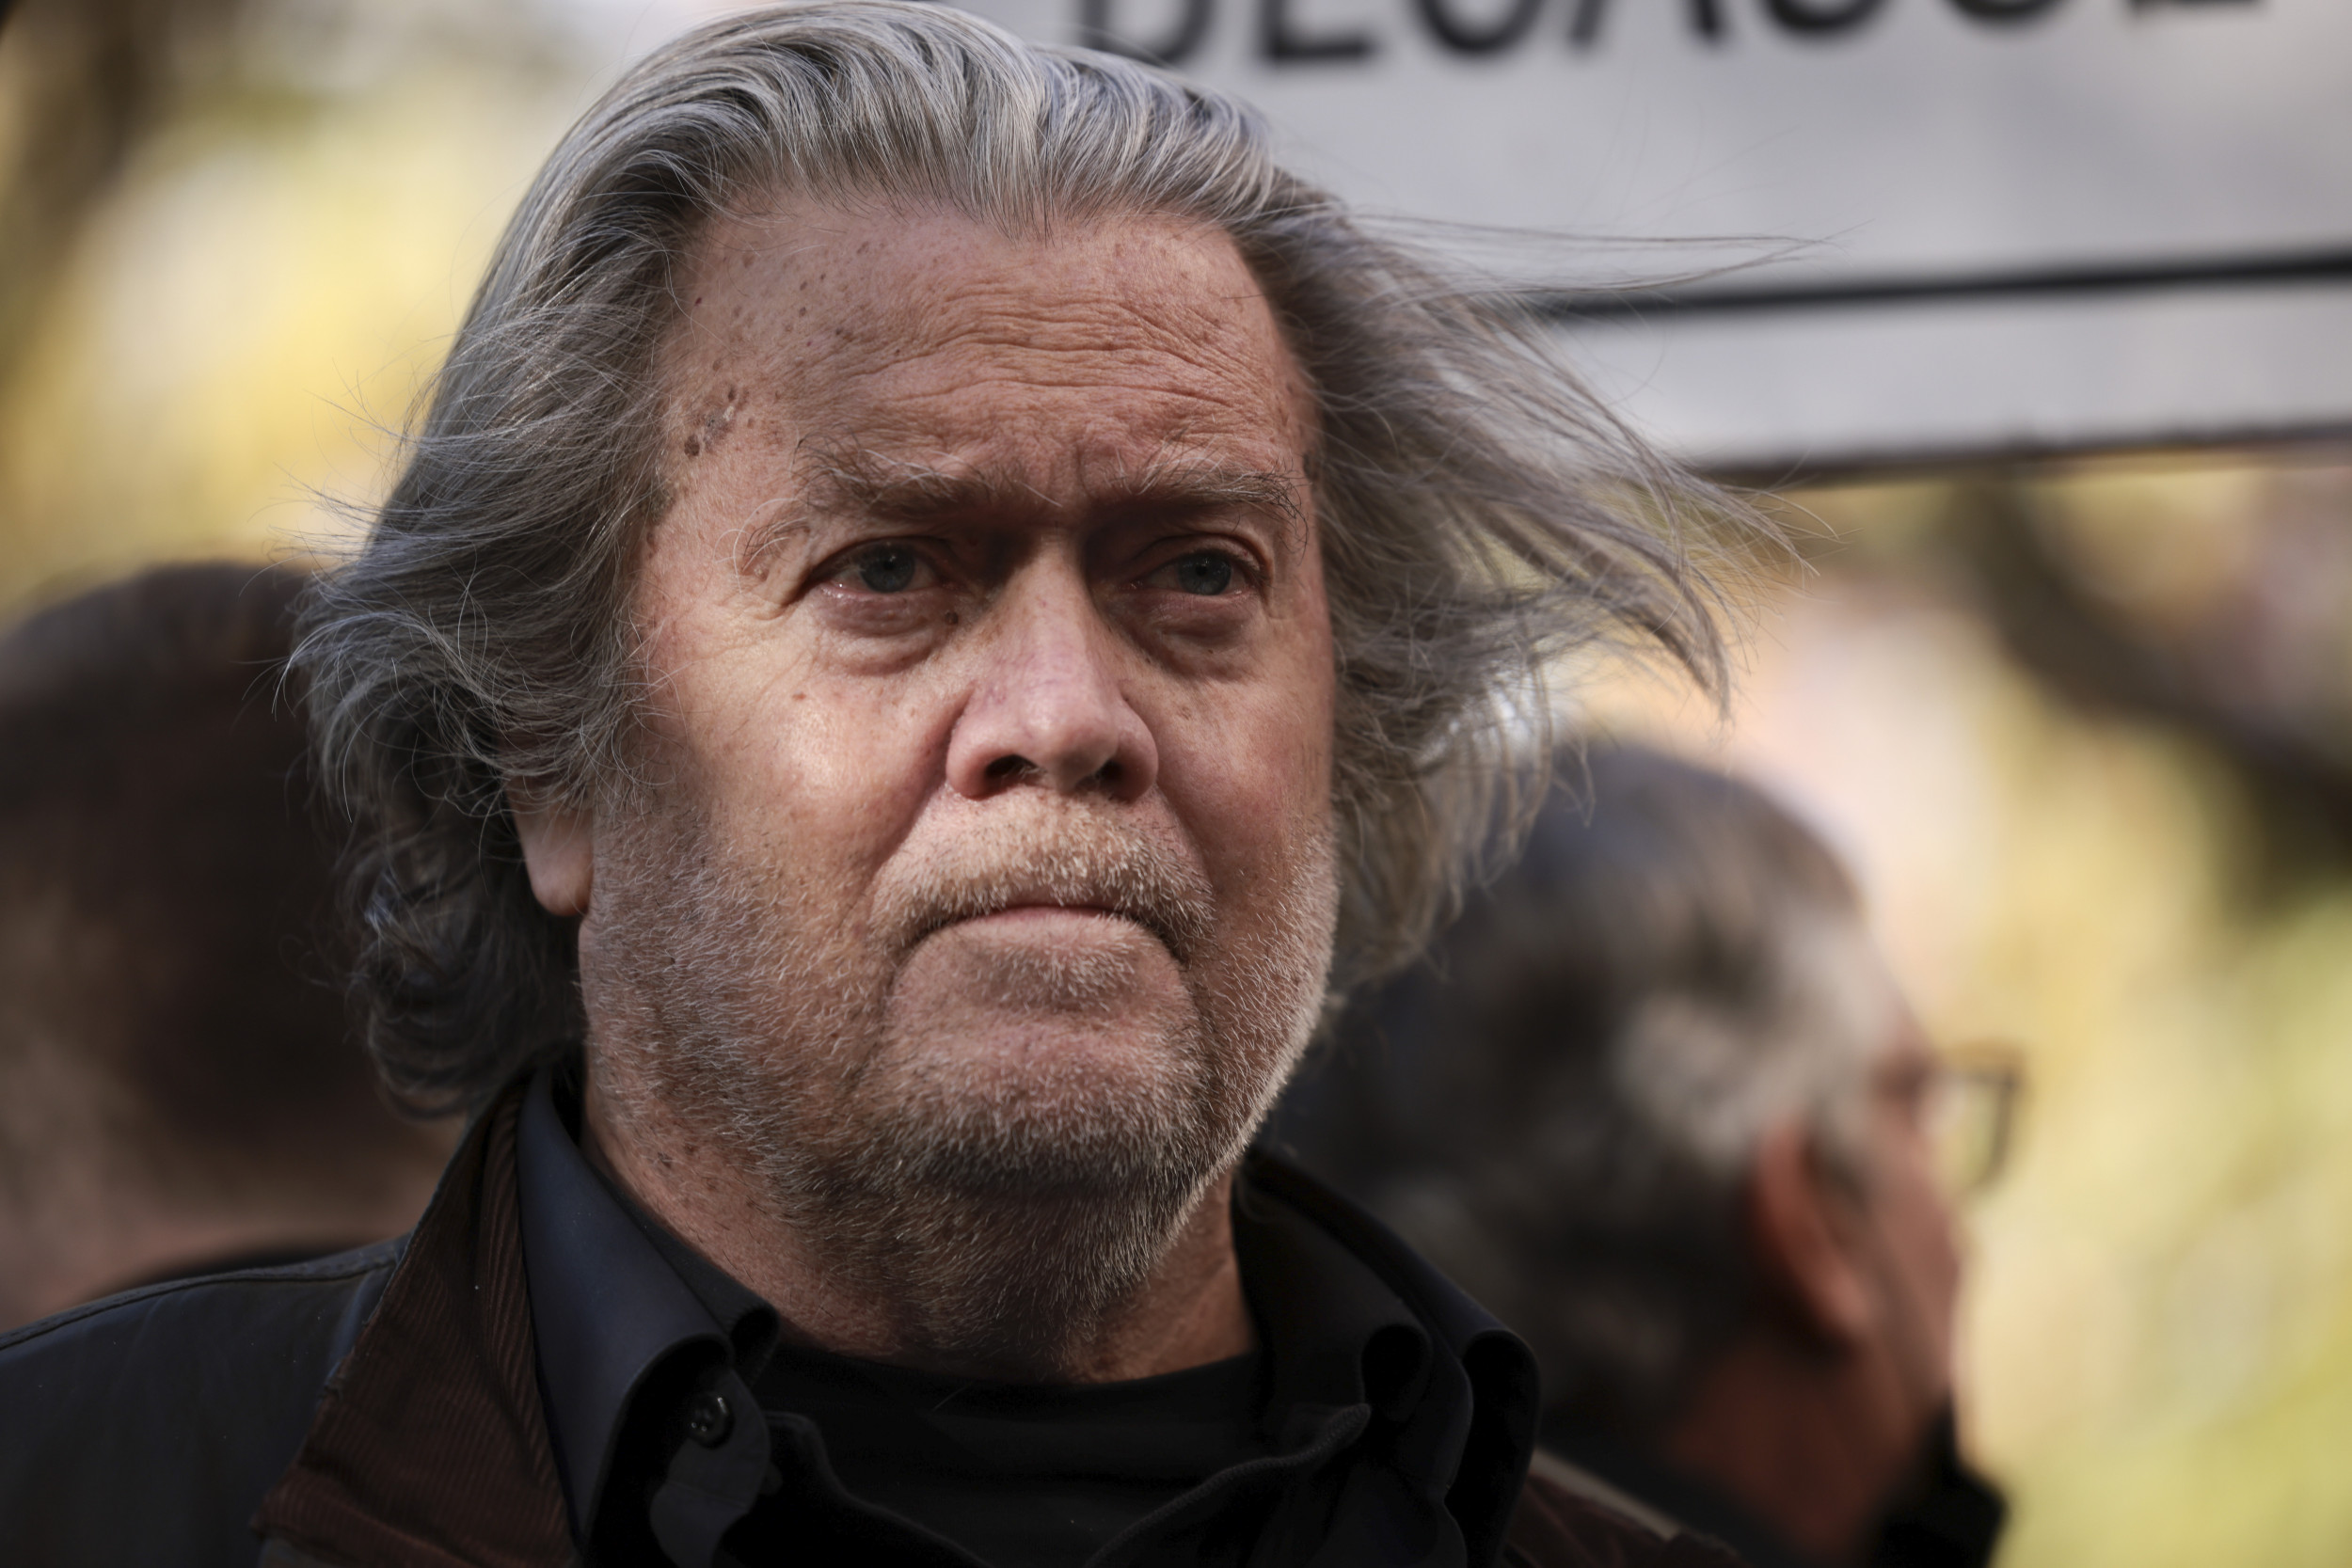 Steve Bannon Addresses 'Replacement Theory' Following Buffalo Shooting